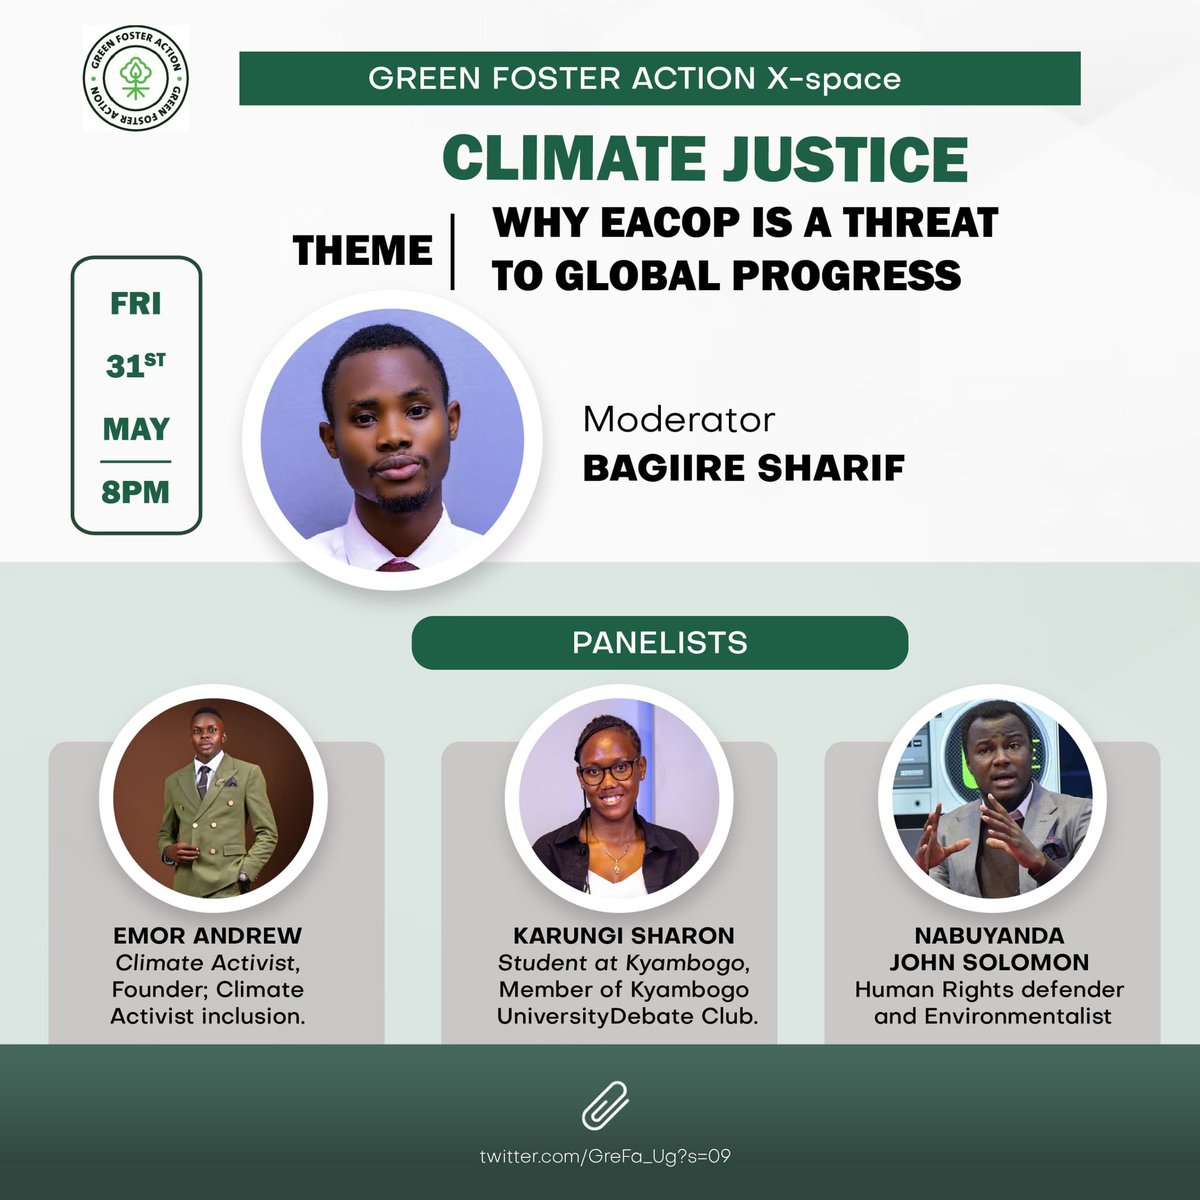 I will this afternoon join @GreFa_Ug  to discuss why @EACOP_ is a global threat and why it ought to be stopped. Please join us in this discussion. @XRebellionUK @ExtinctionR @stopEACOP @JusticeUg256 @ashatenbroeke @FridayForFuture